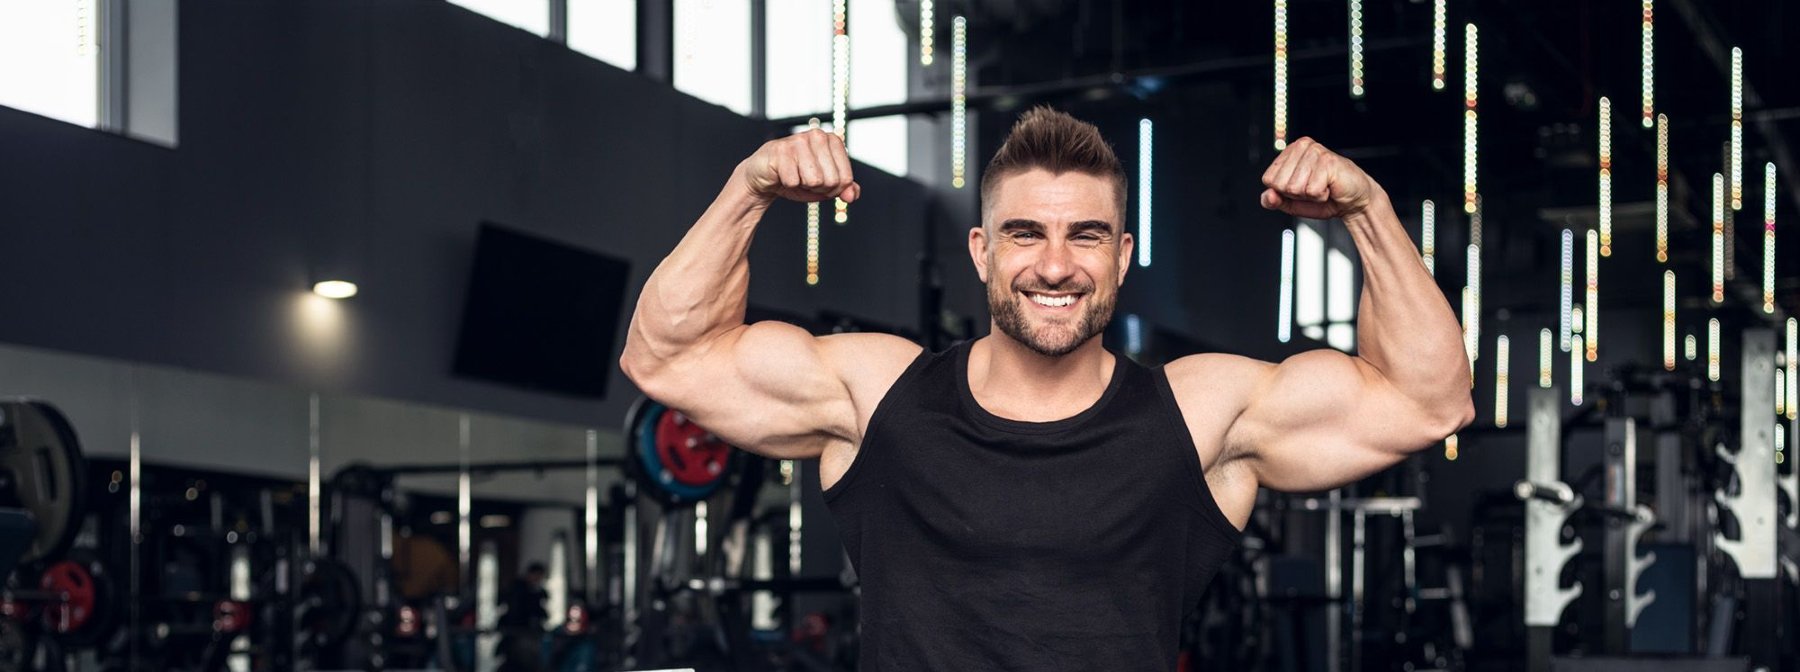 6-Time Mr Olympia Competitor Ryan Terry Shares His Secrets